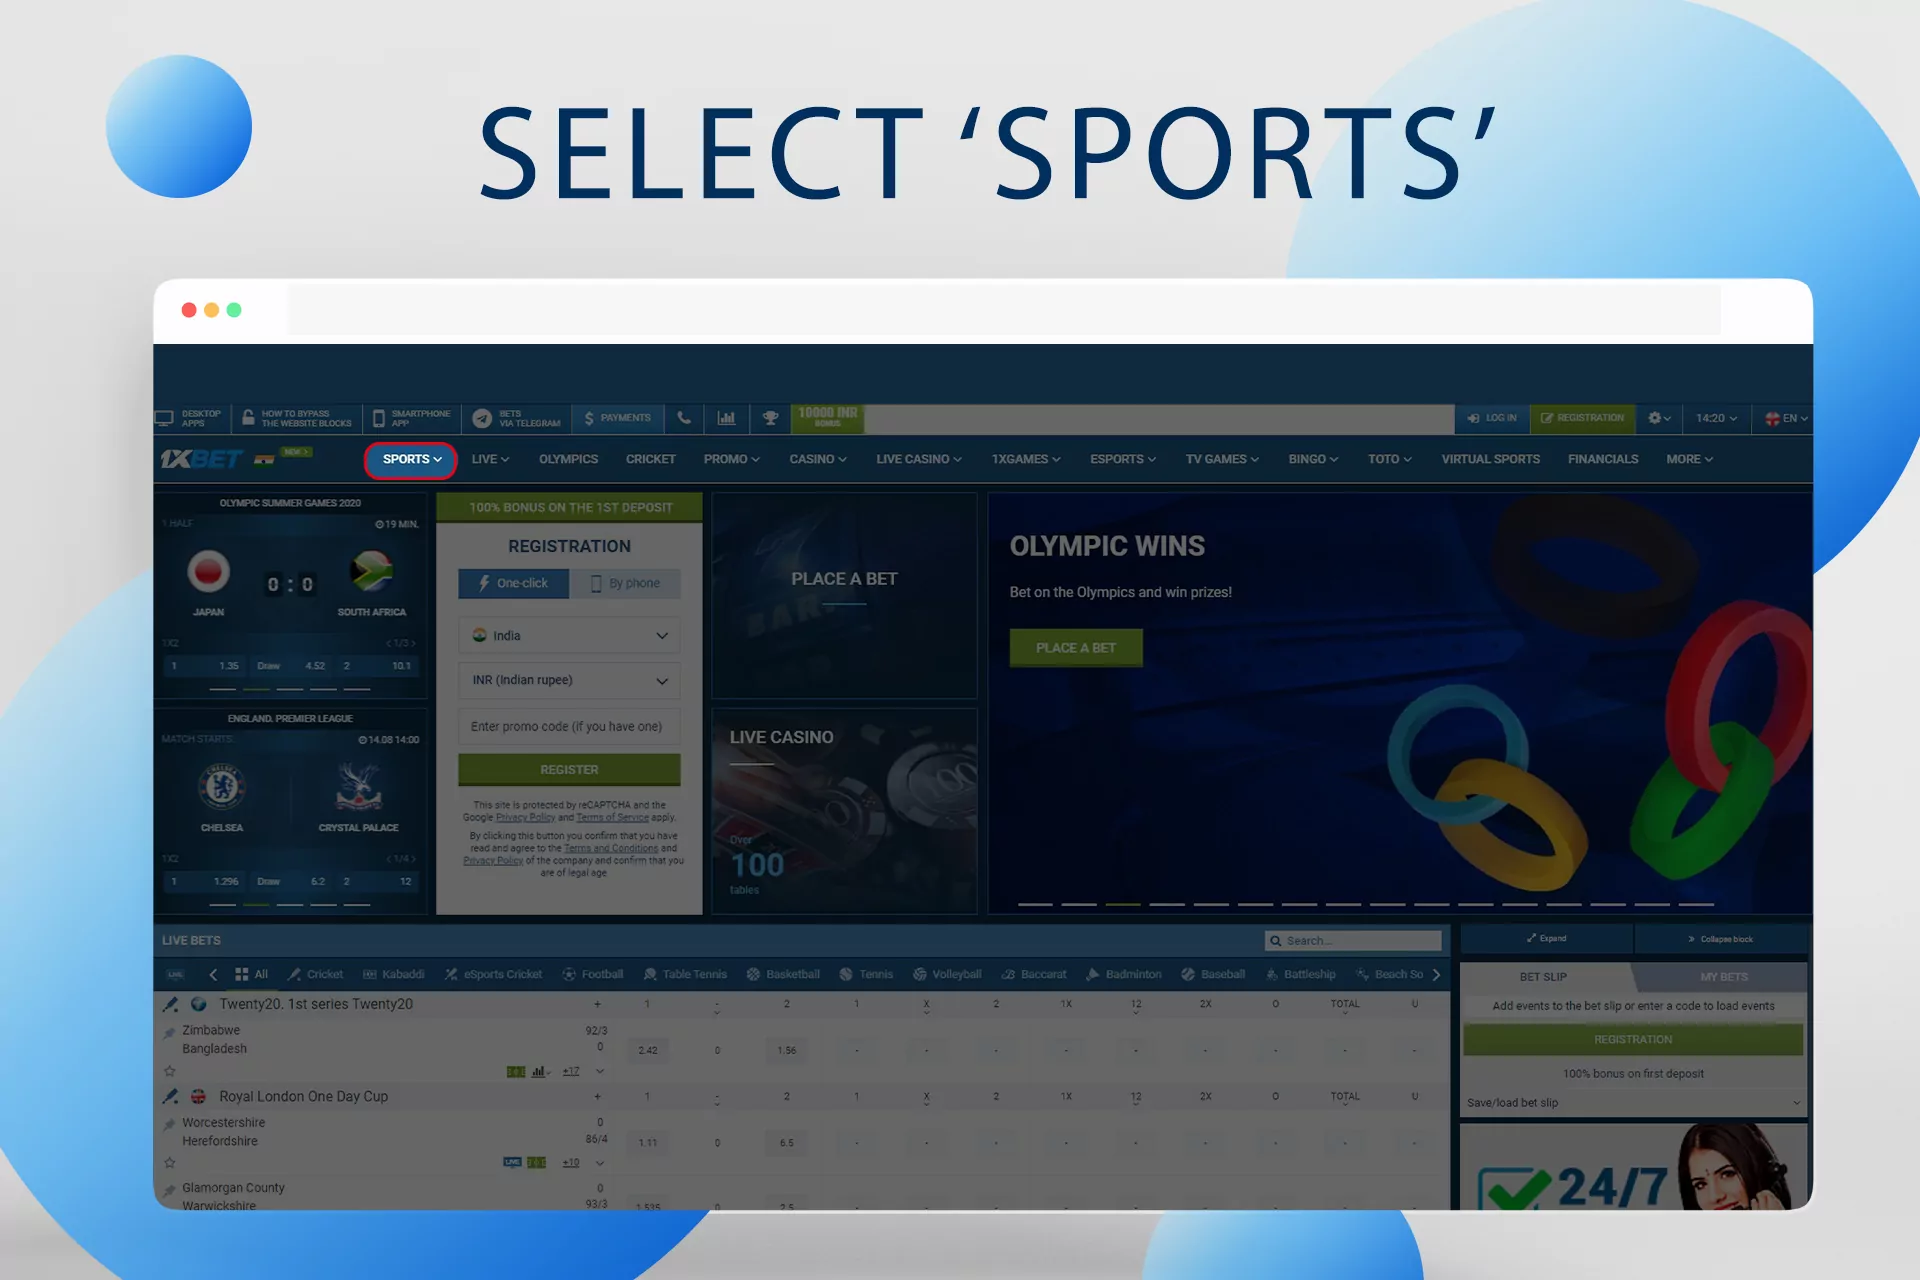 Go to the sports section and choose cricket.